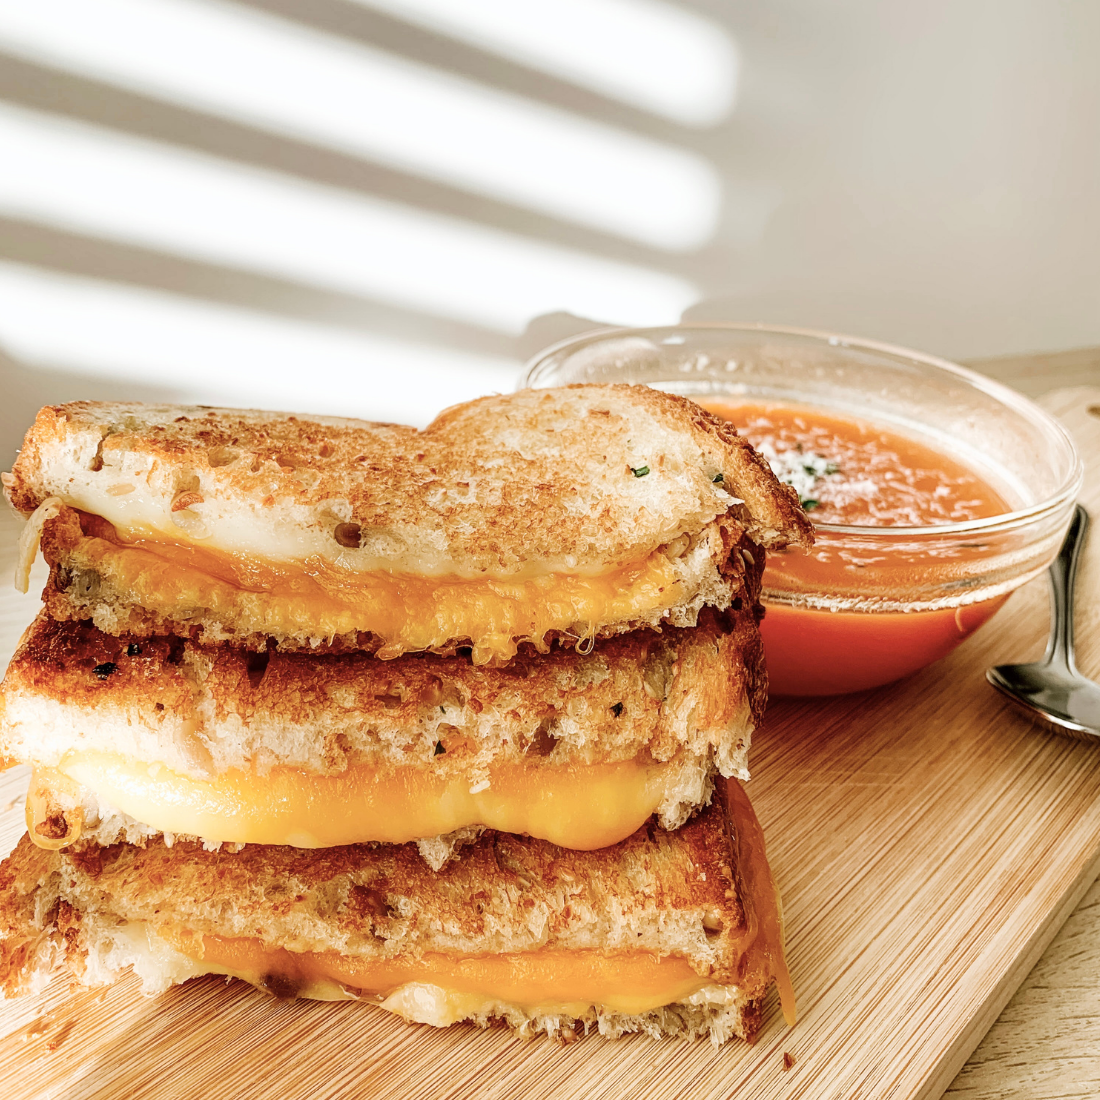 Grilled Cheese Image 1 